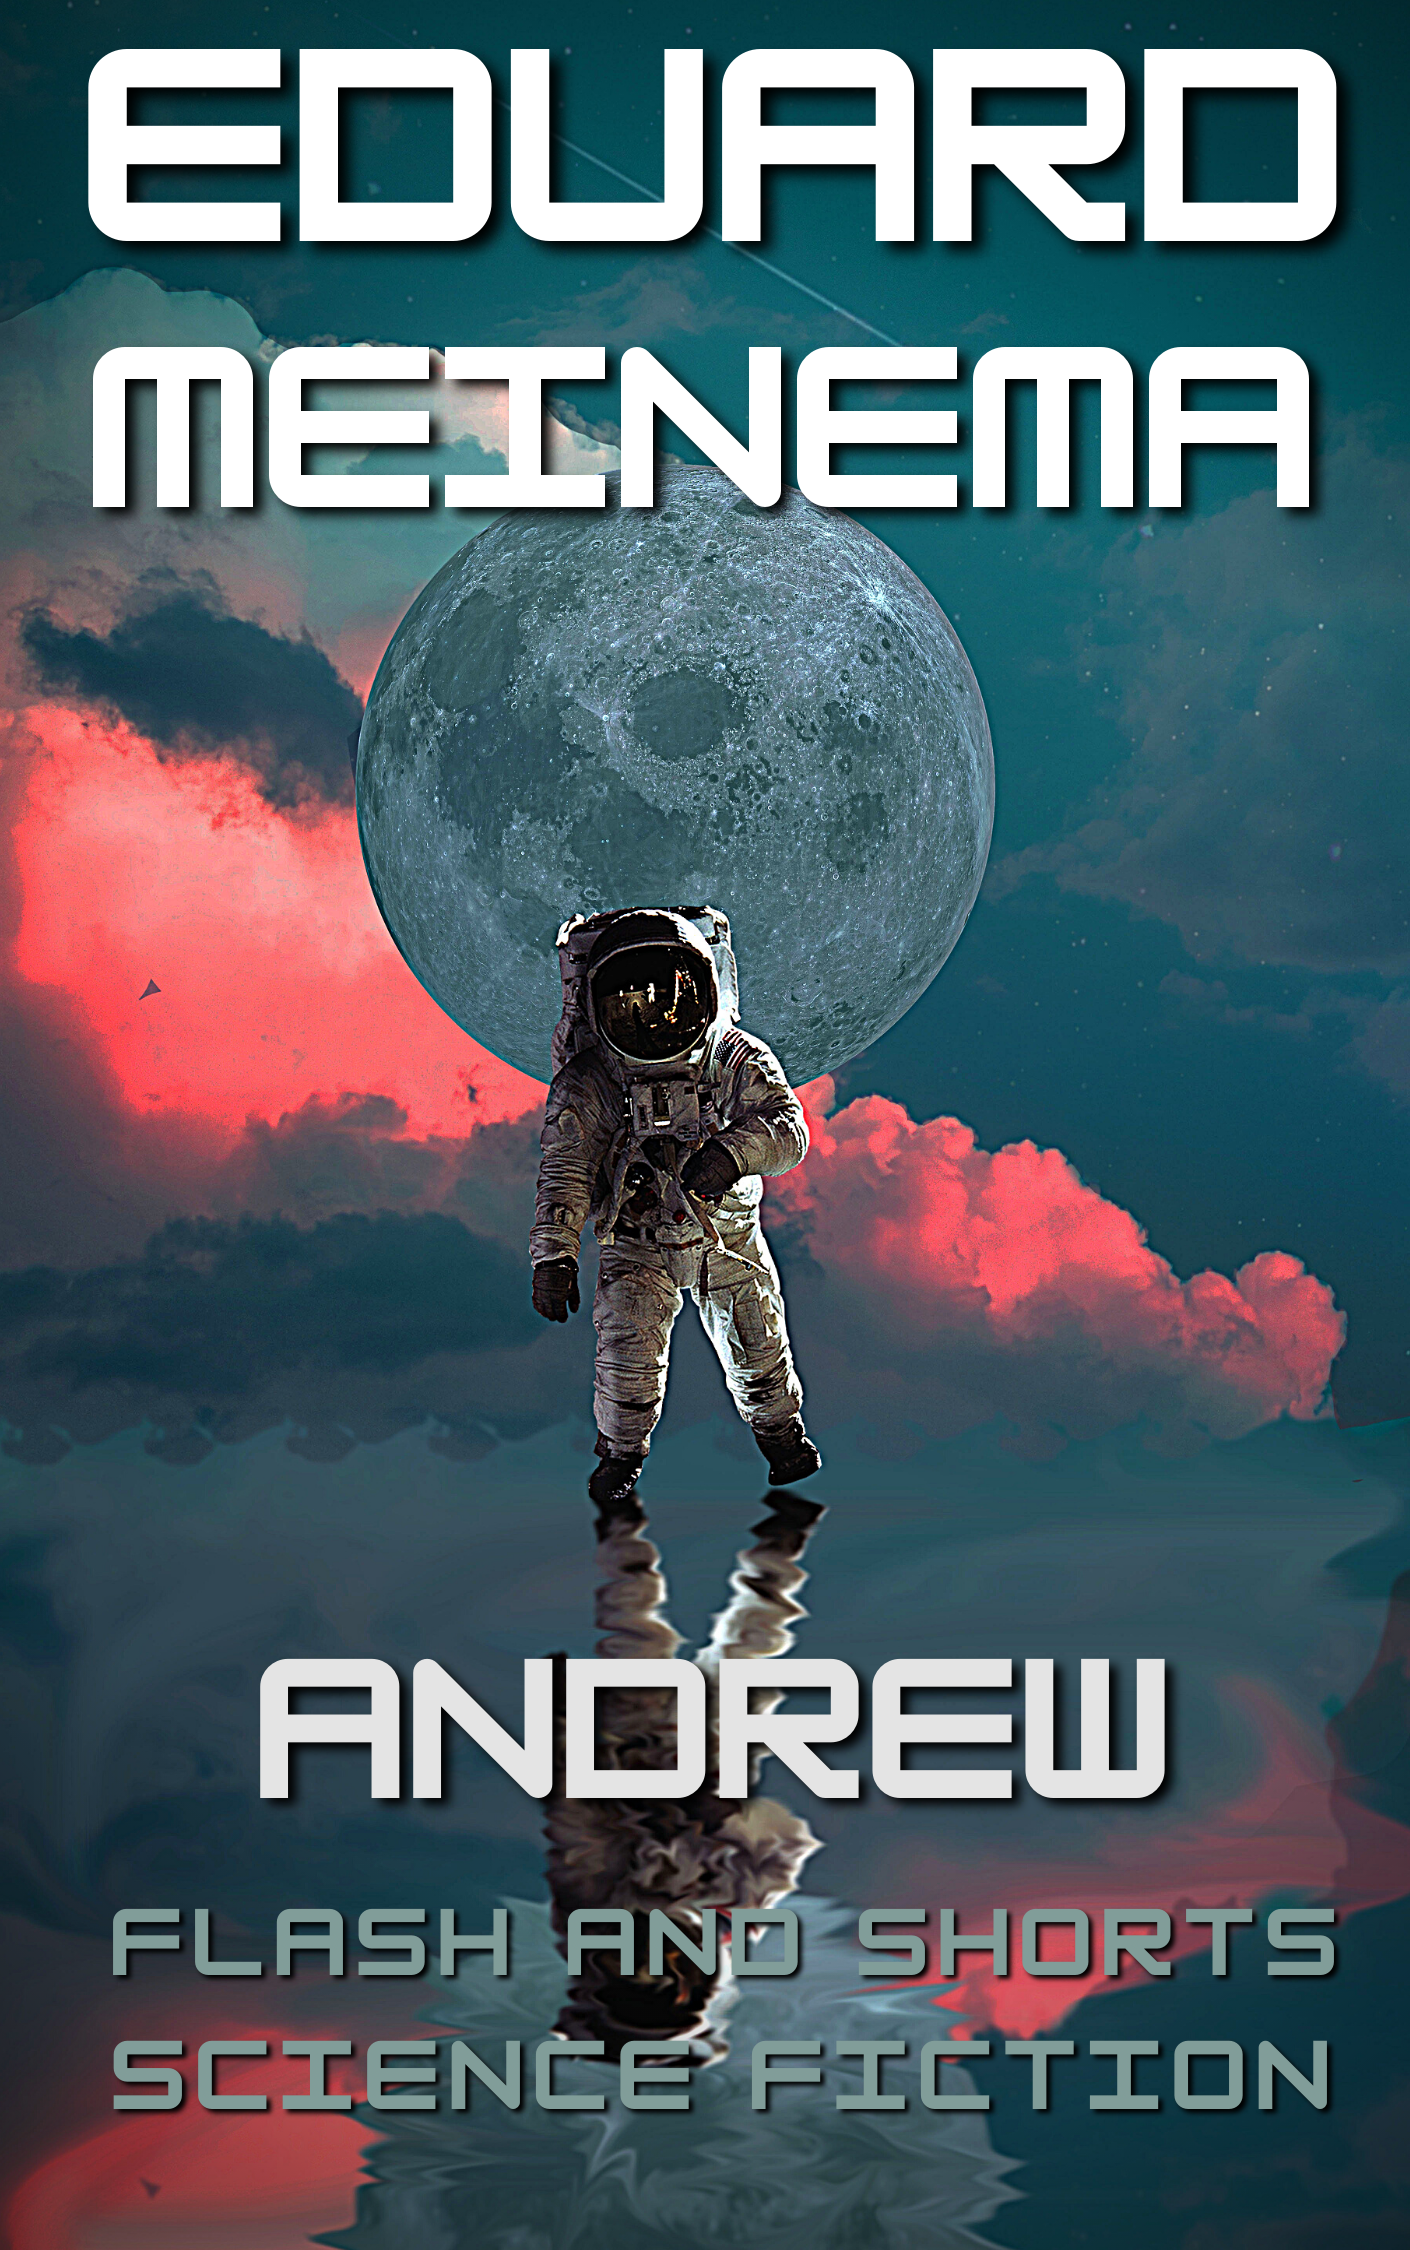 Andrew,  a Flash Fiction  story by Eduard Meinema.